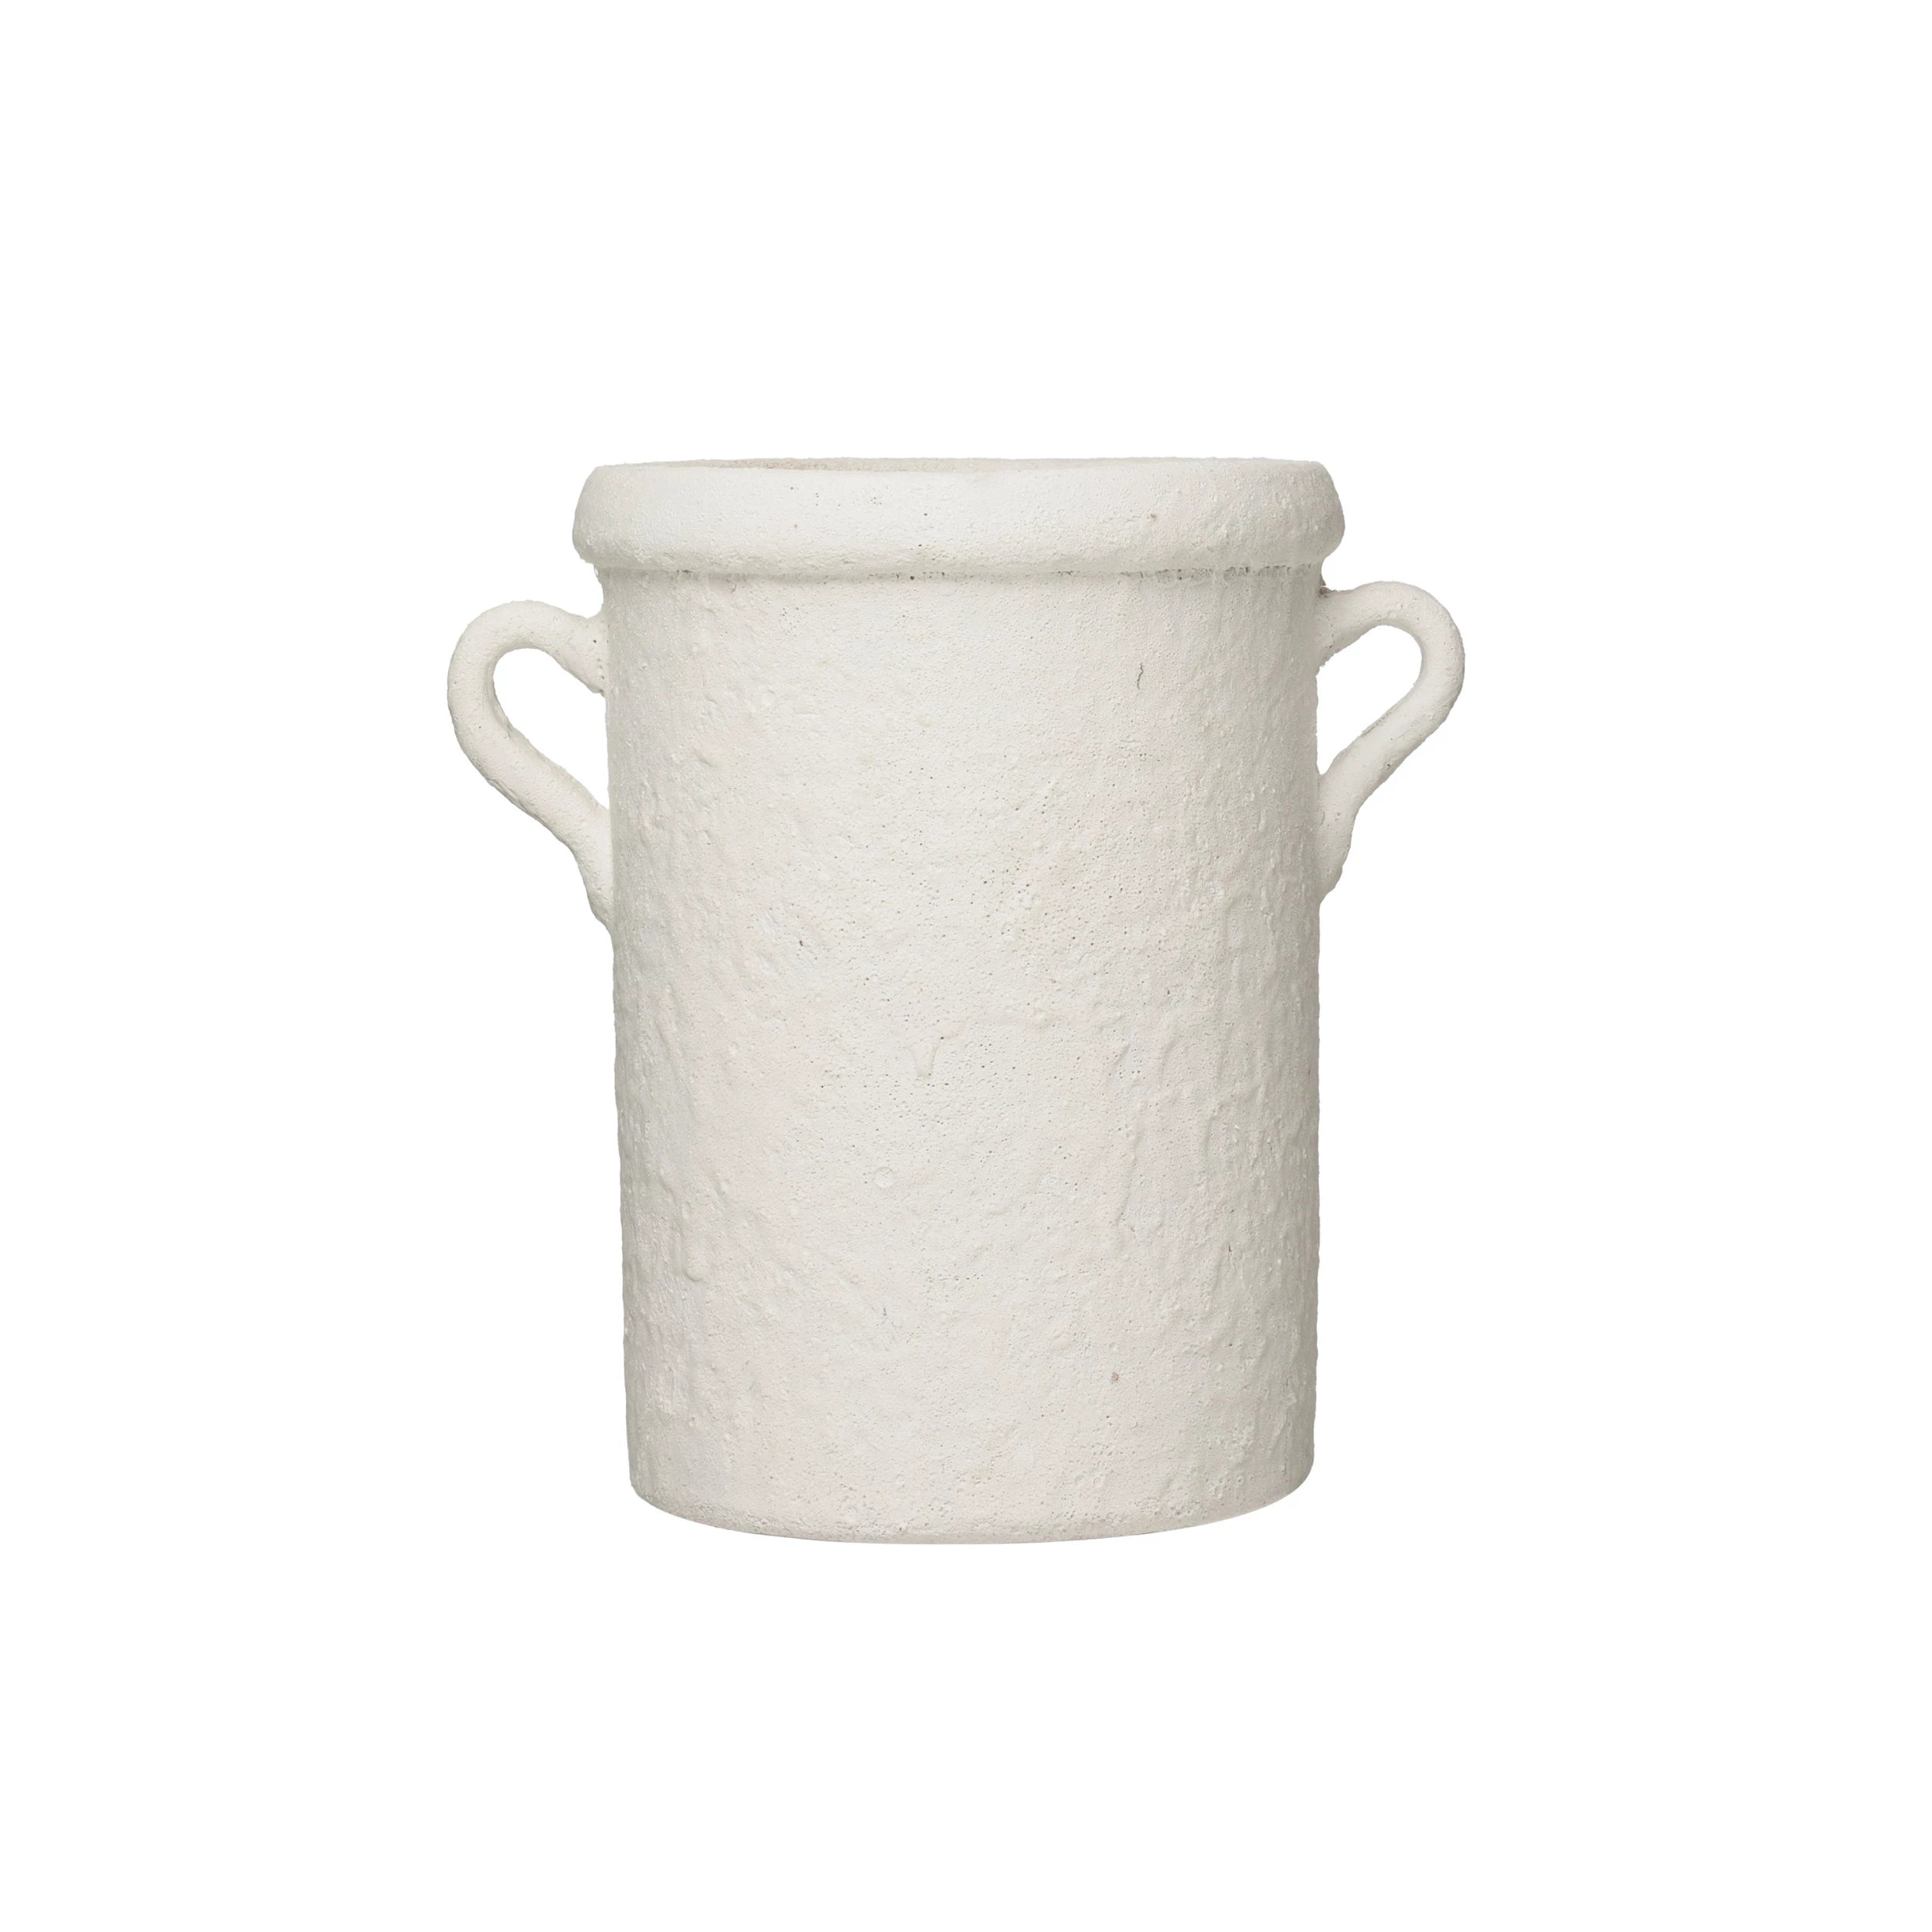 Course White Terracotta Crock with Handles